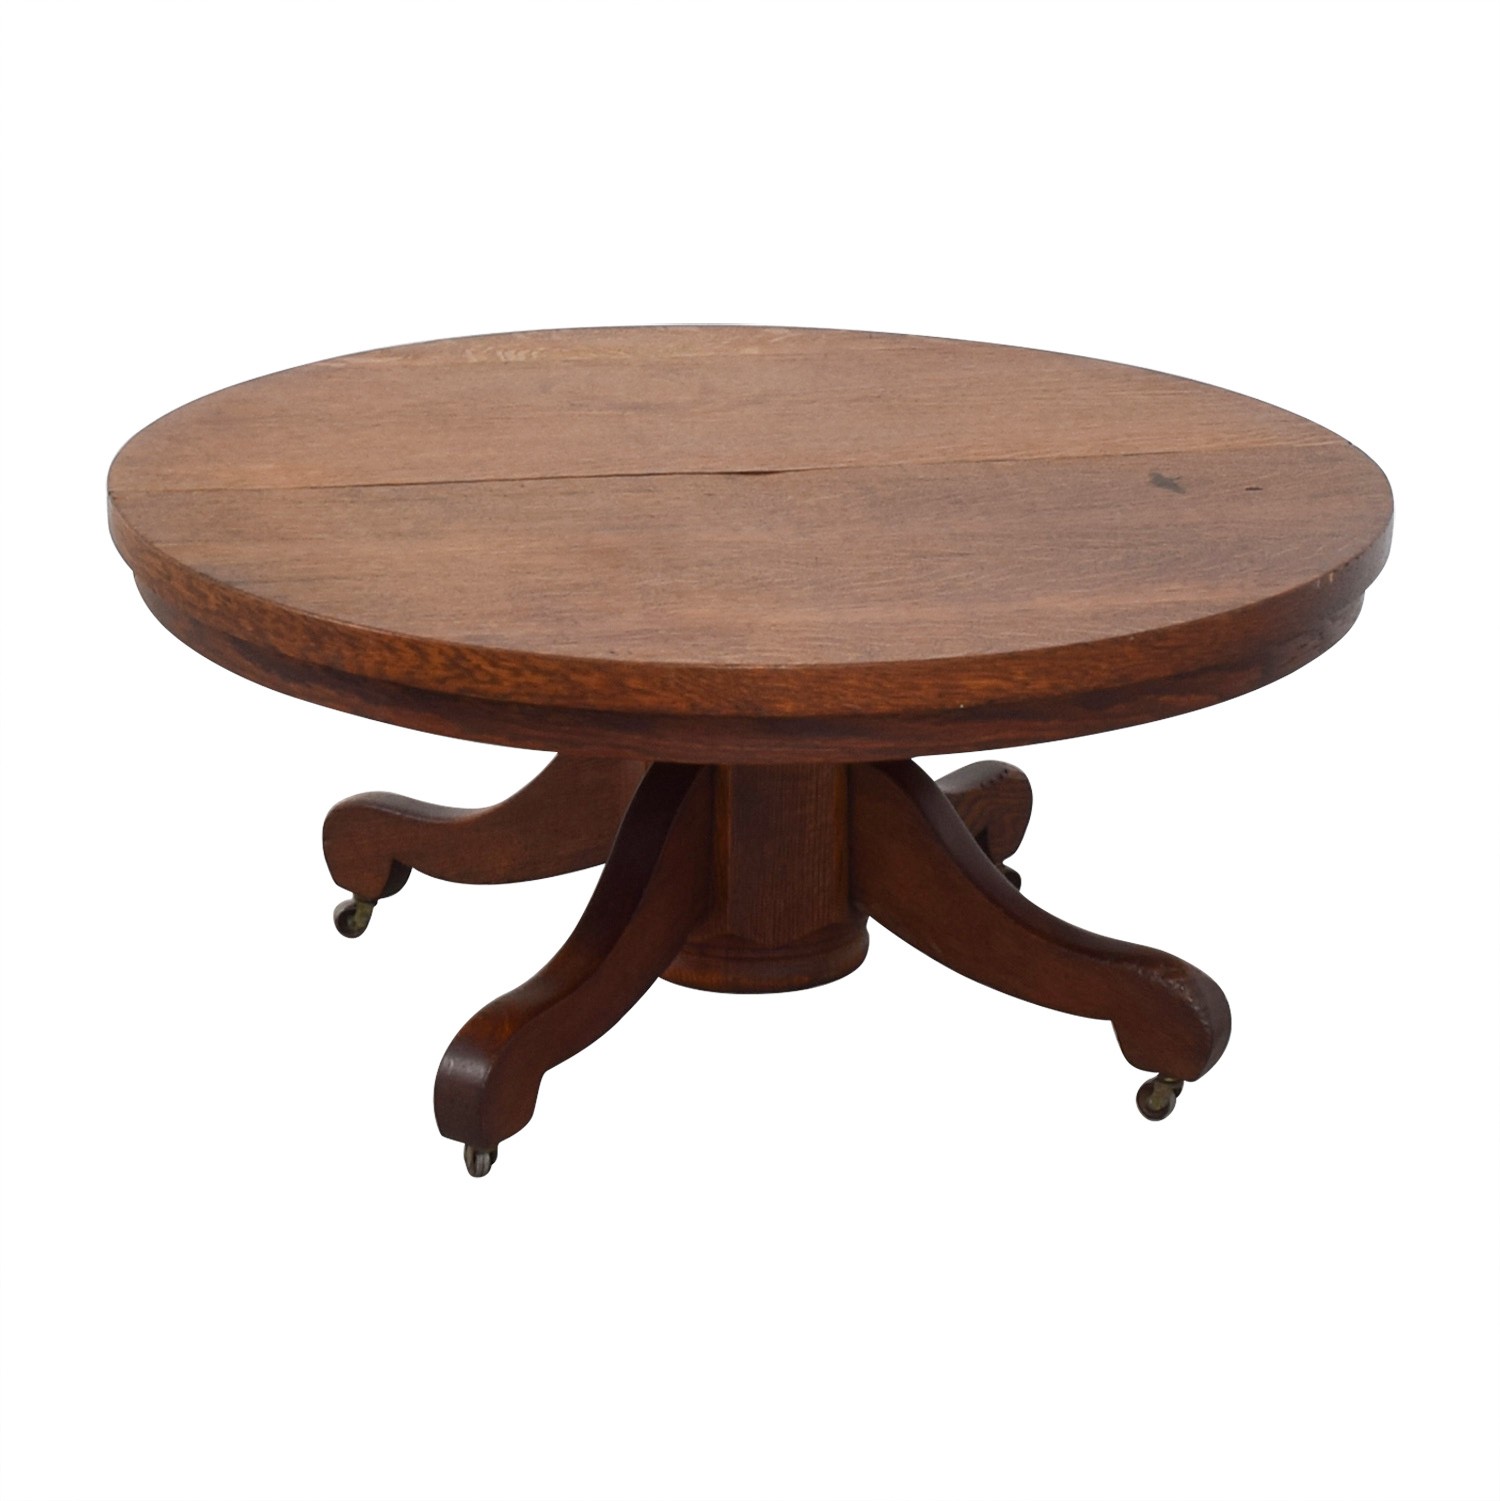 90 off round oak coffee table tables